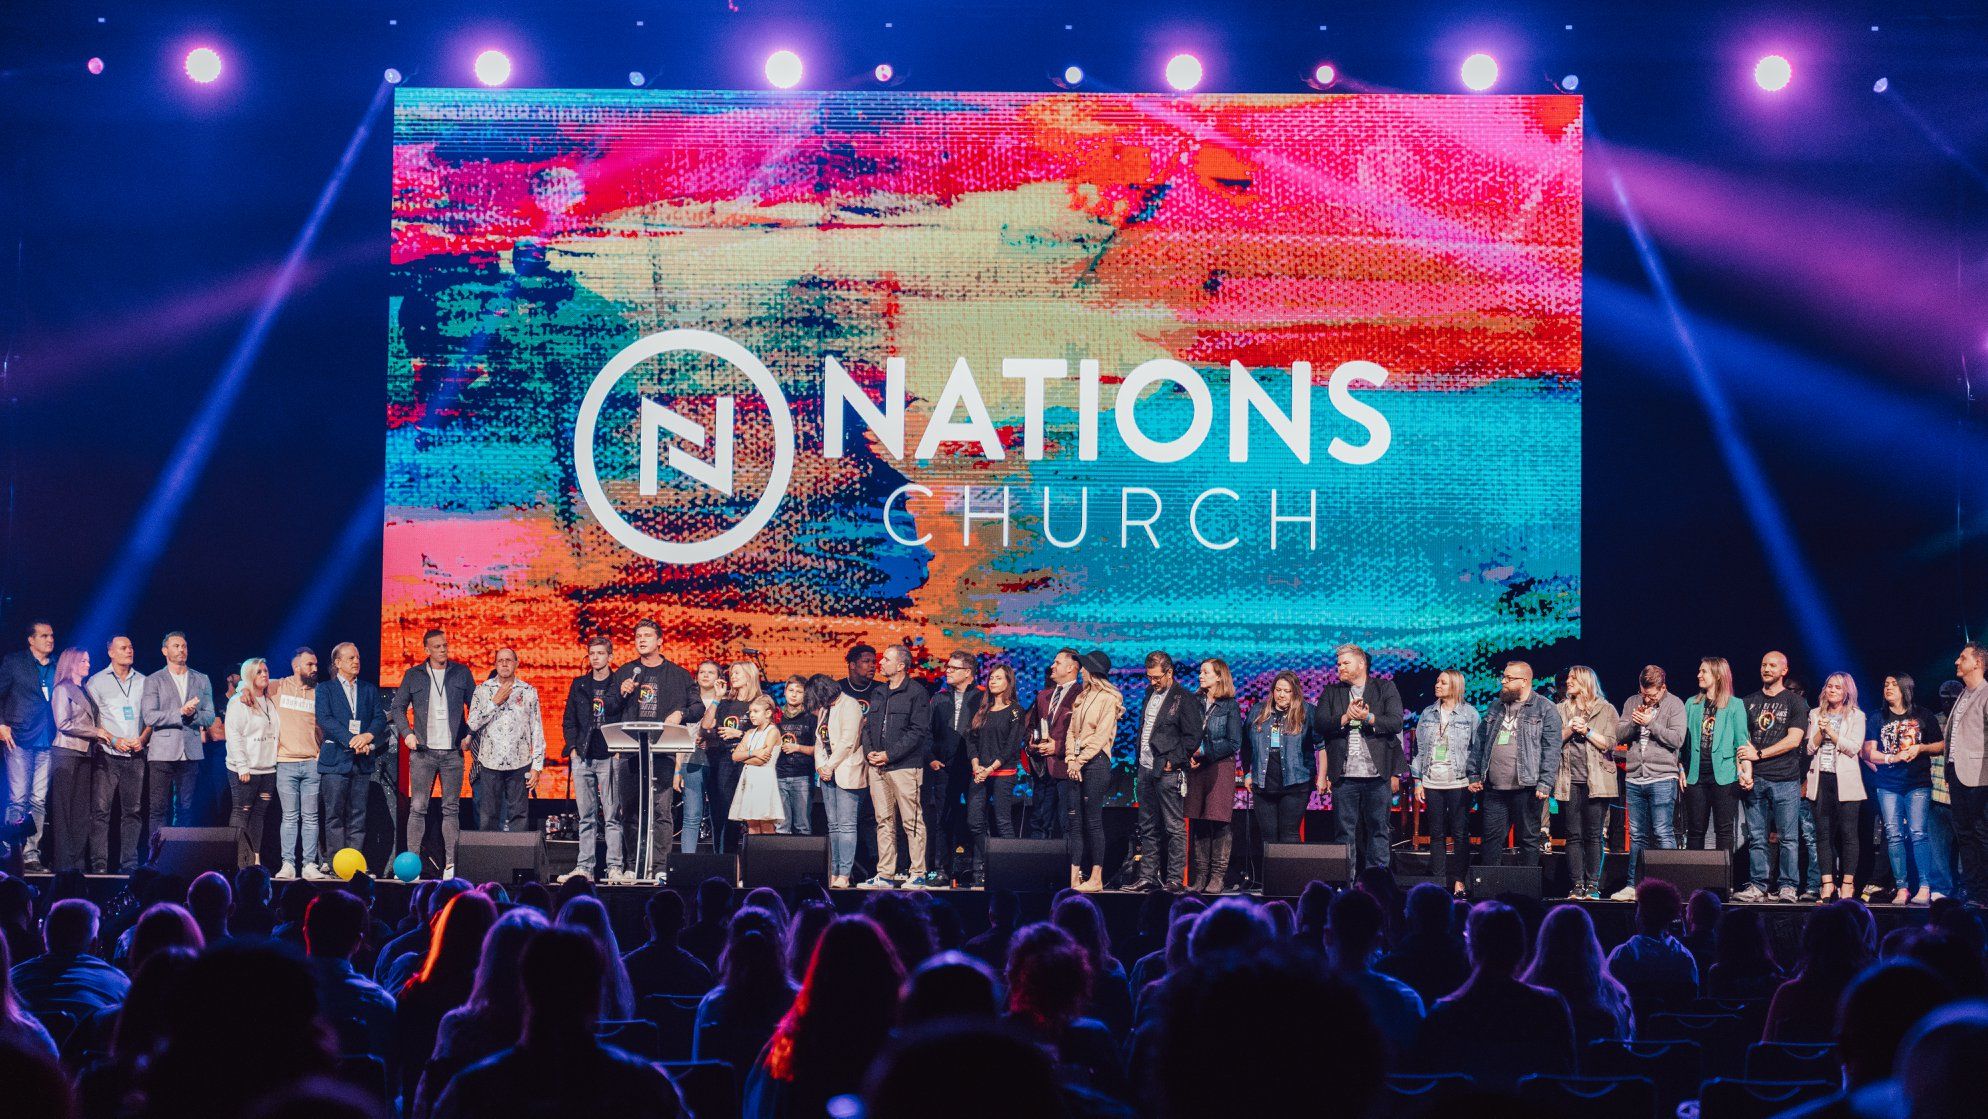 At the 2021 Fire Conference, Christ for All Nations' (CfaN) President Daniel Kolenda, announced the forthcoming launch of Nations Church